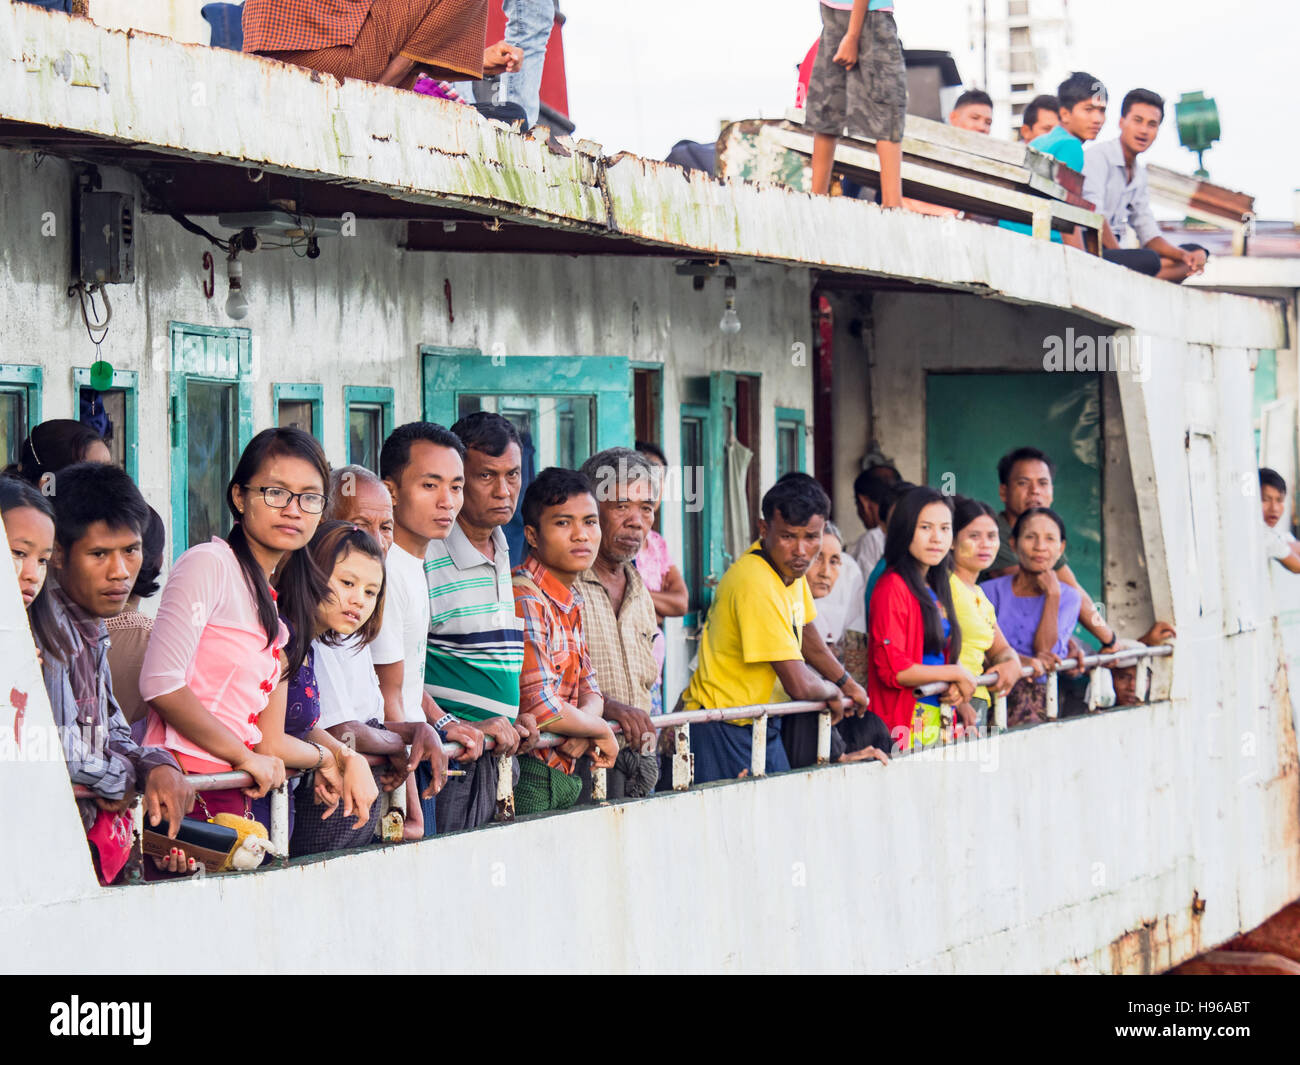 Passengers on a ferry before departure at a canal in Sittwe, the capital of the Rakhine State, Myanmar. Stock Photo